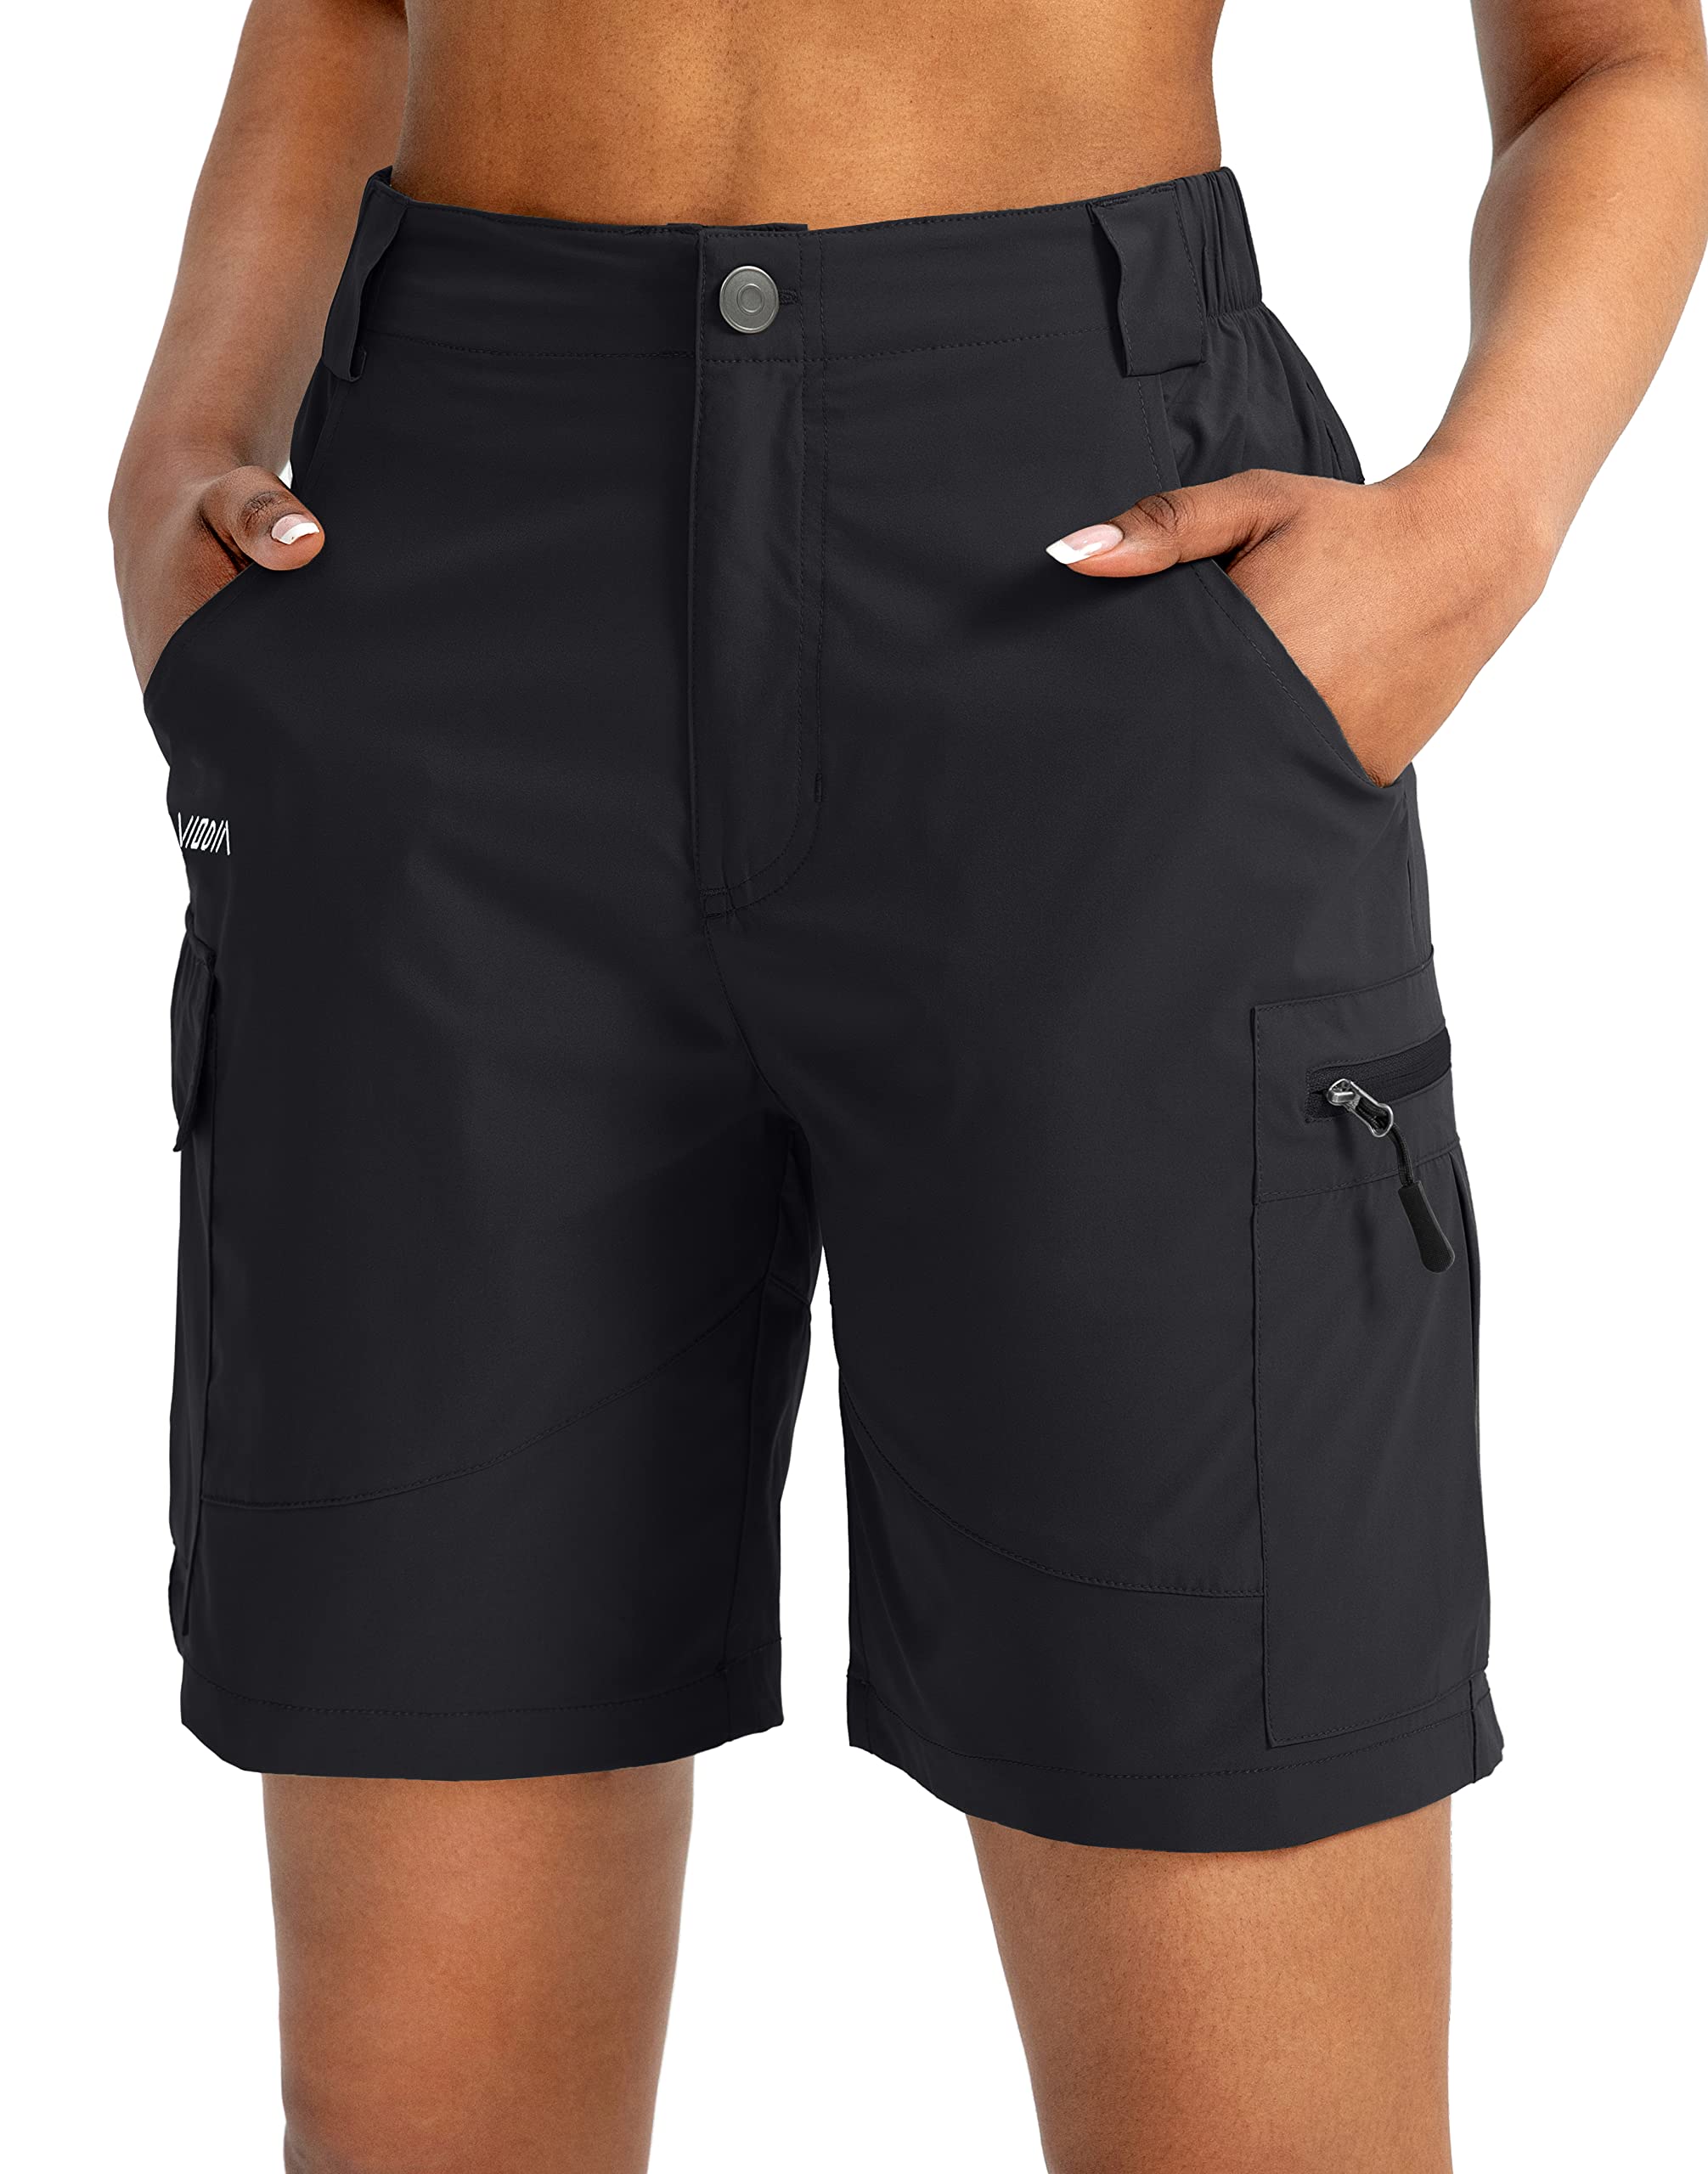 Viodia Mens Hiking Cargo Shorts Stretch Quick Dry Lightweight Workout Shorts For Men Casual Fishing Athletic Shorts With Pockets